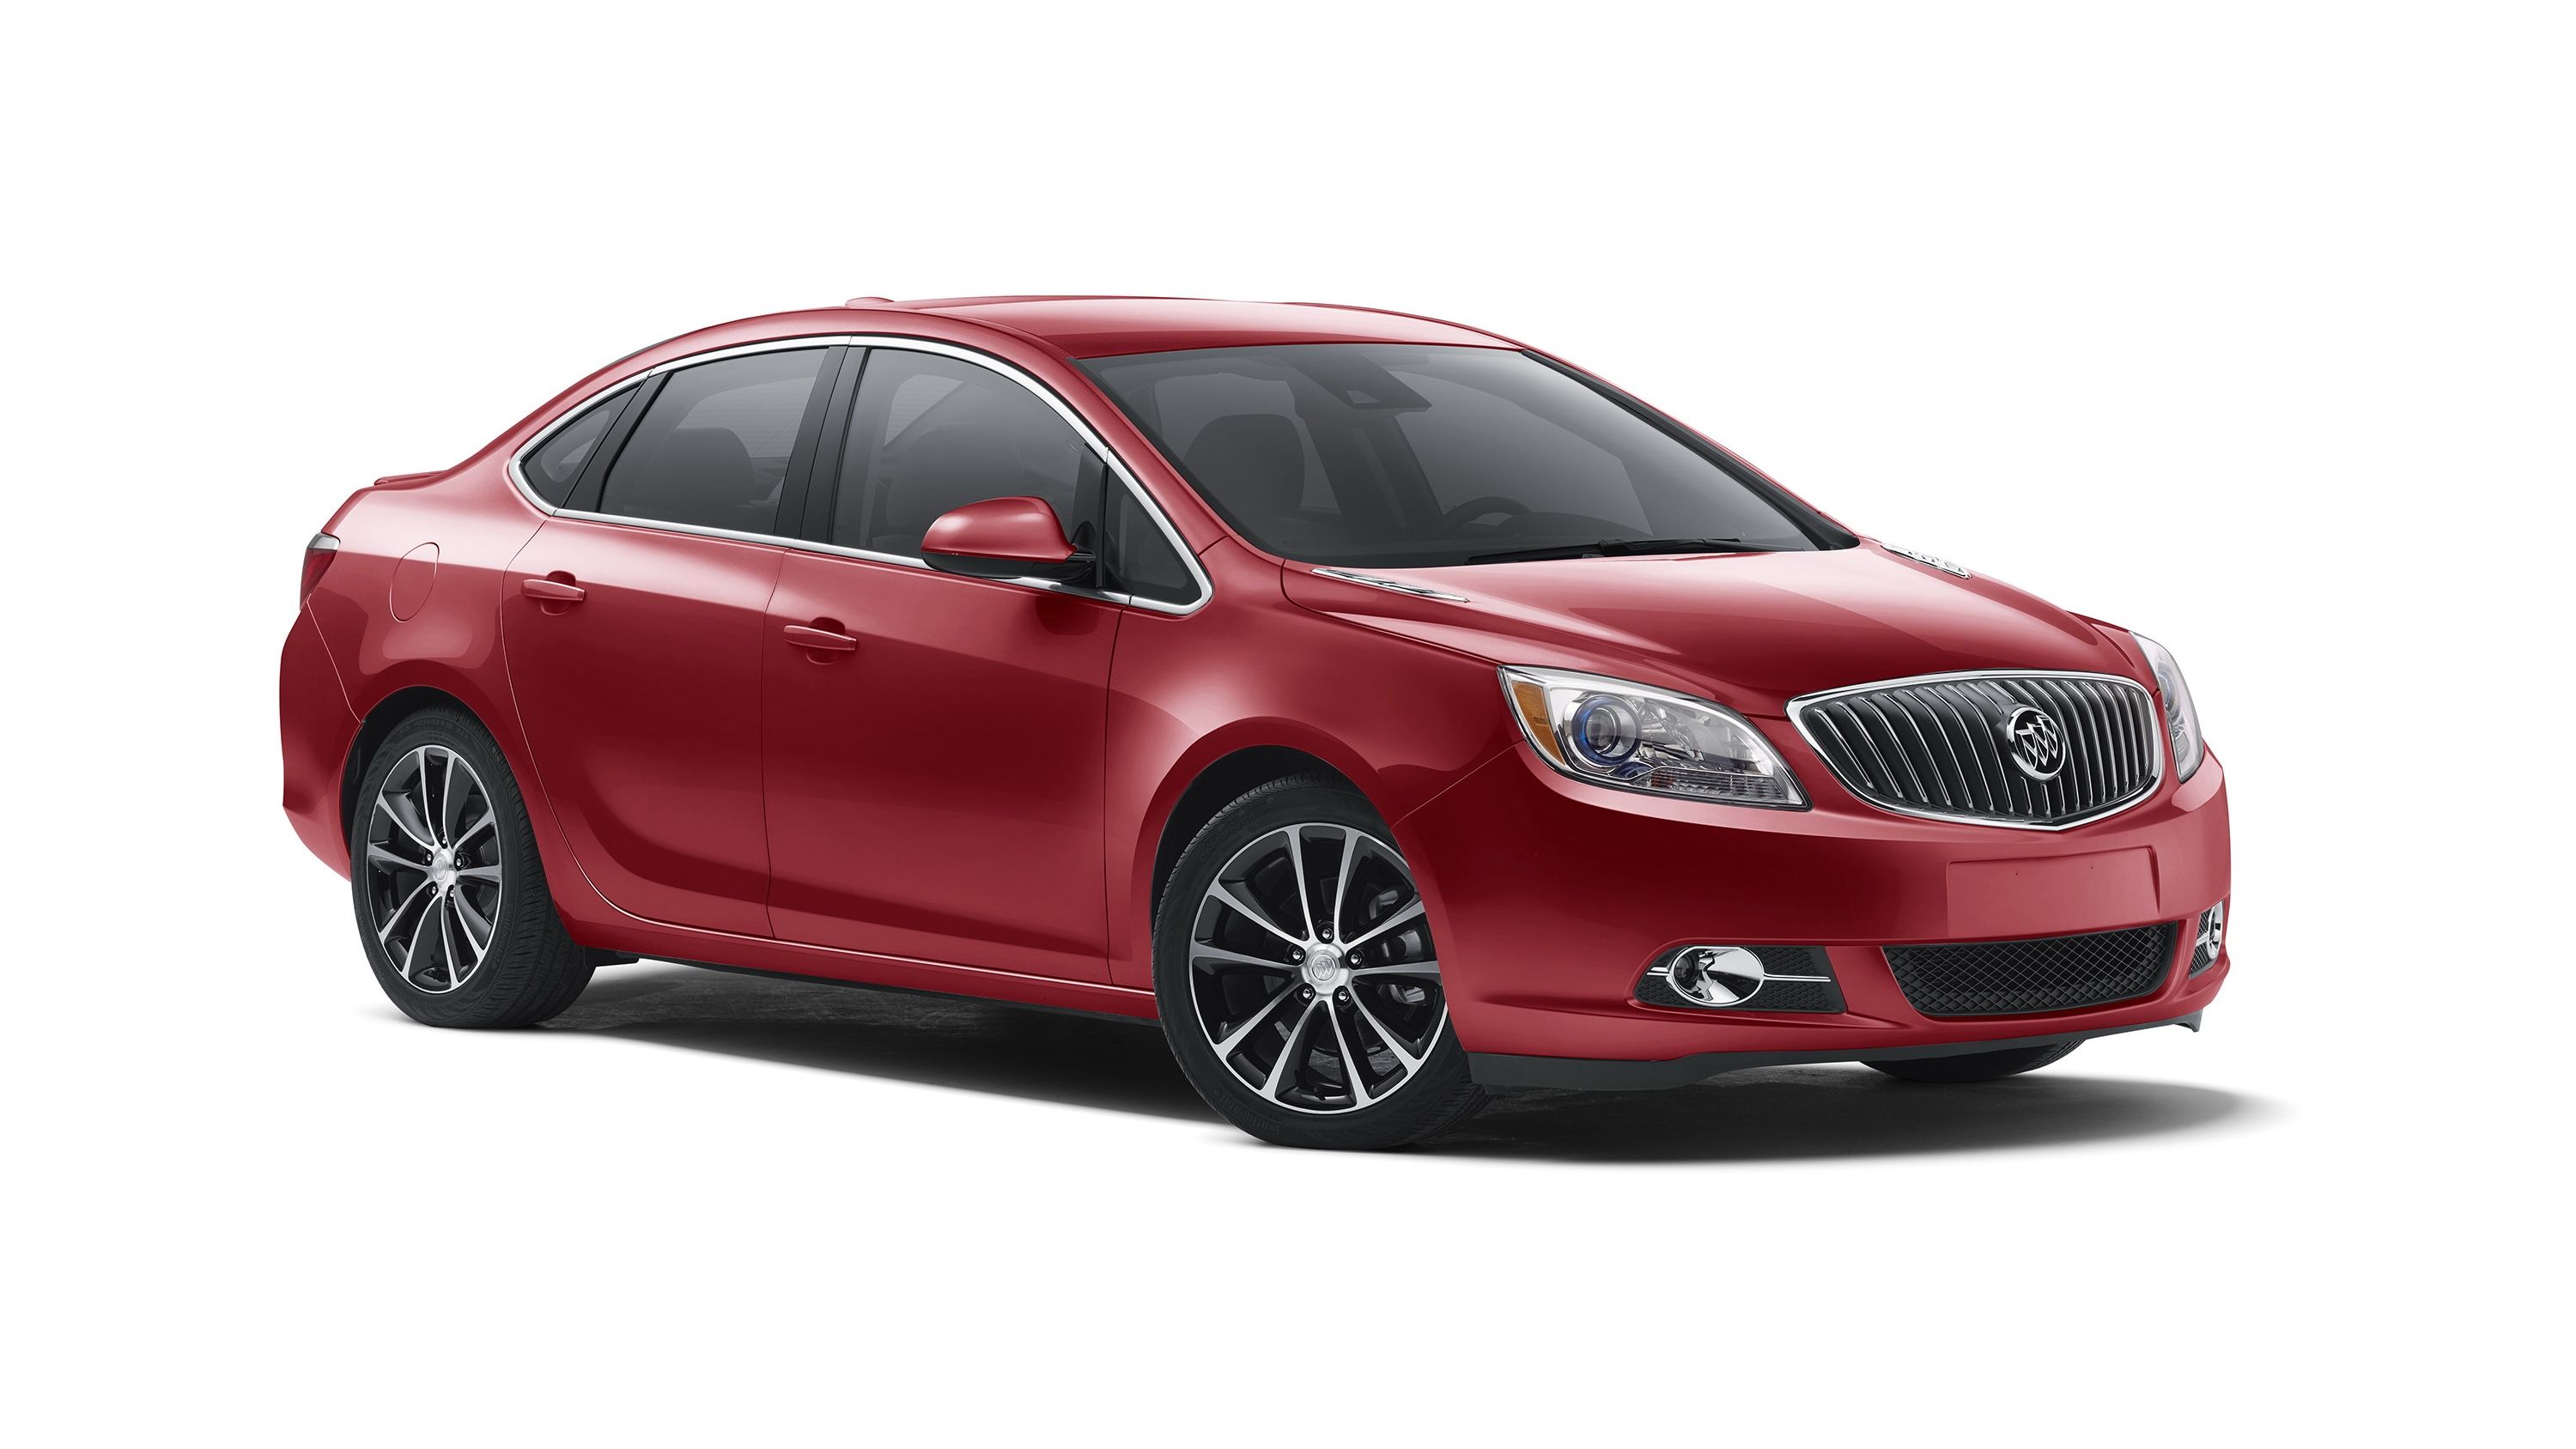 2016 Buick Verano To Be Dropped In The U.S. Market